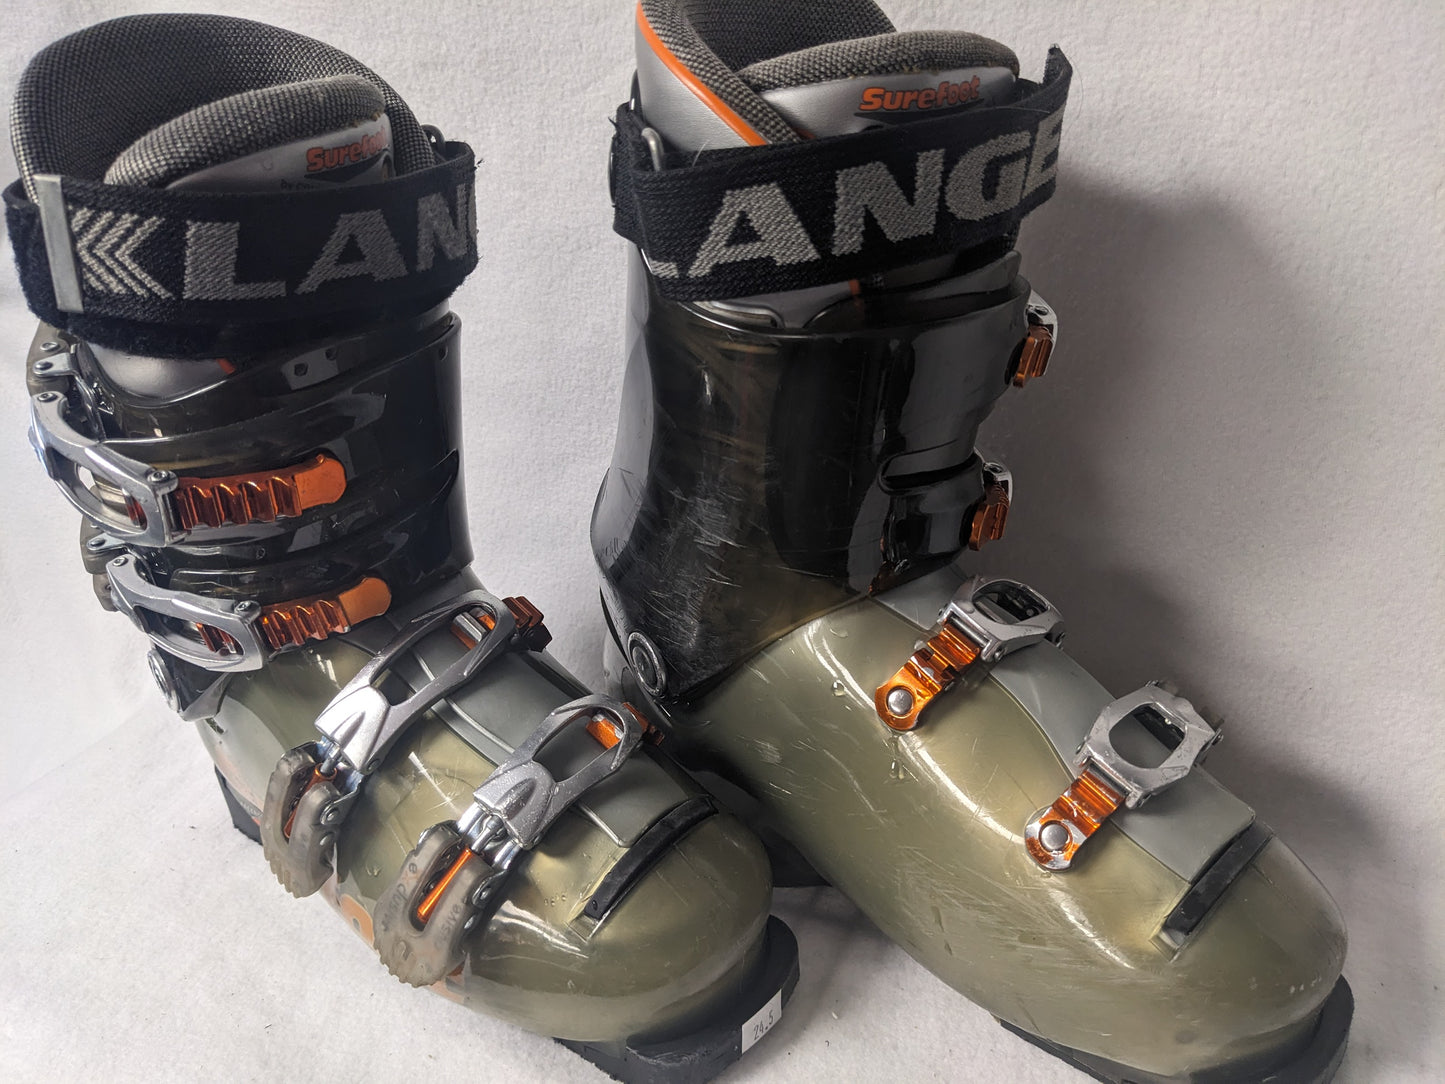 Lange Surefoot Exclusive 100 Women's Ski Boots Size 24.5 Color Green Condition Used